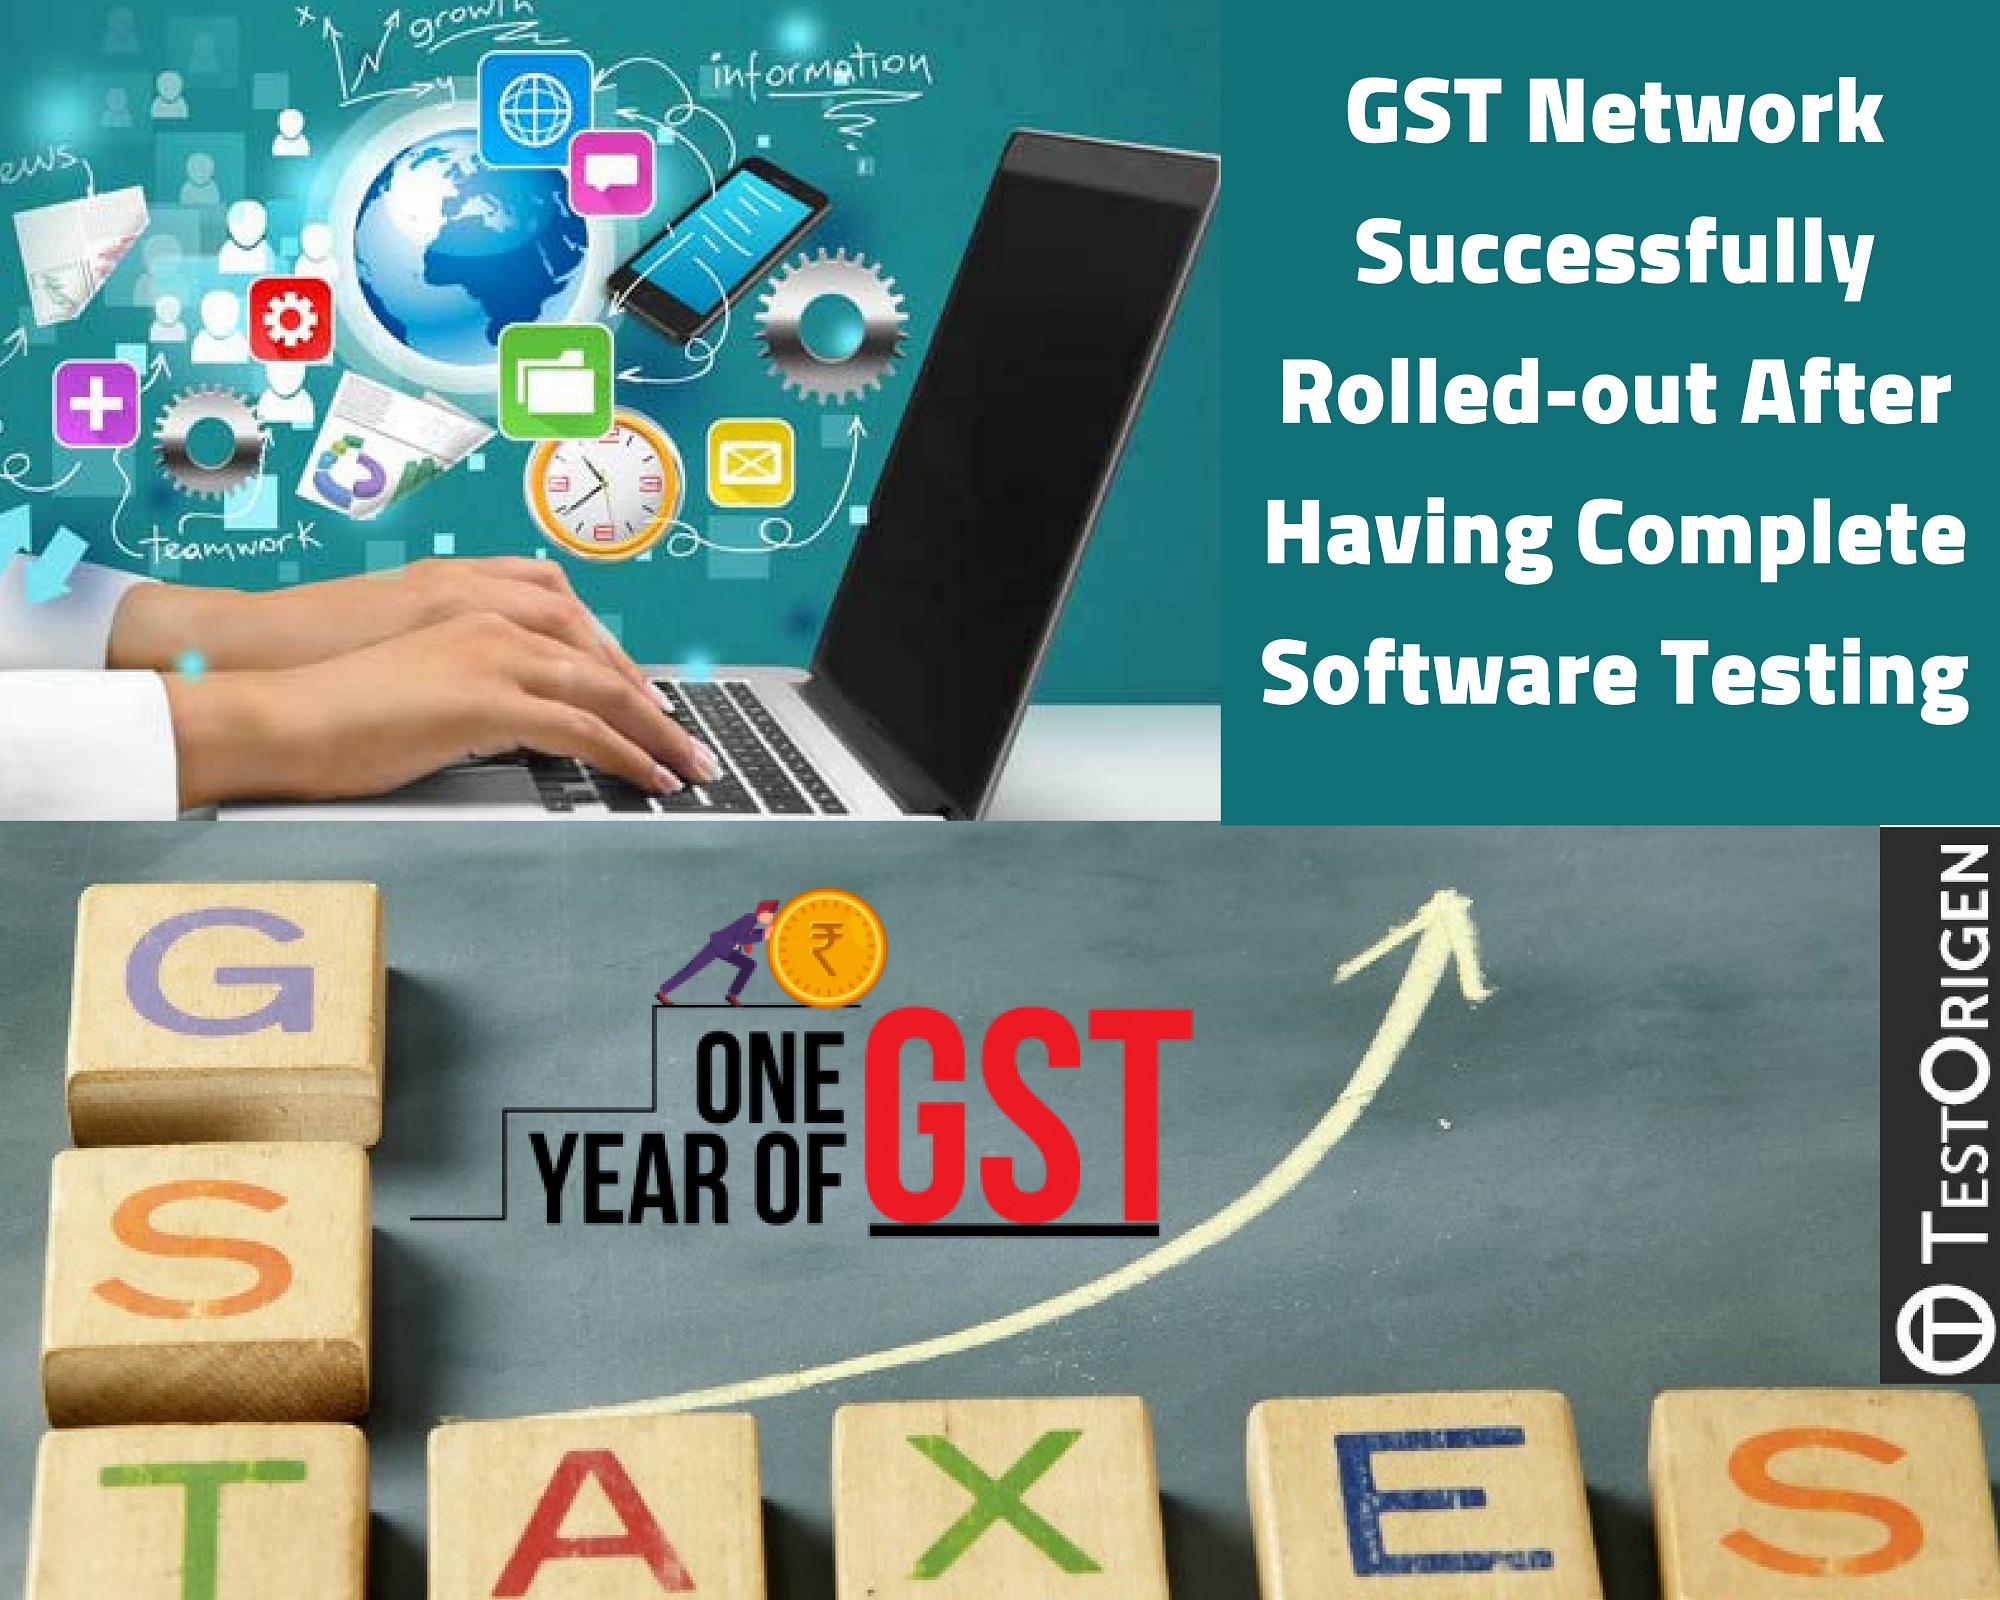 GST Network Successfully Rolled-out After Having Complete Software Testing